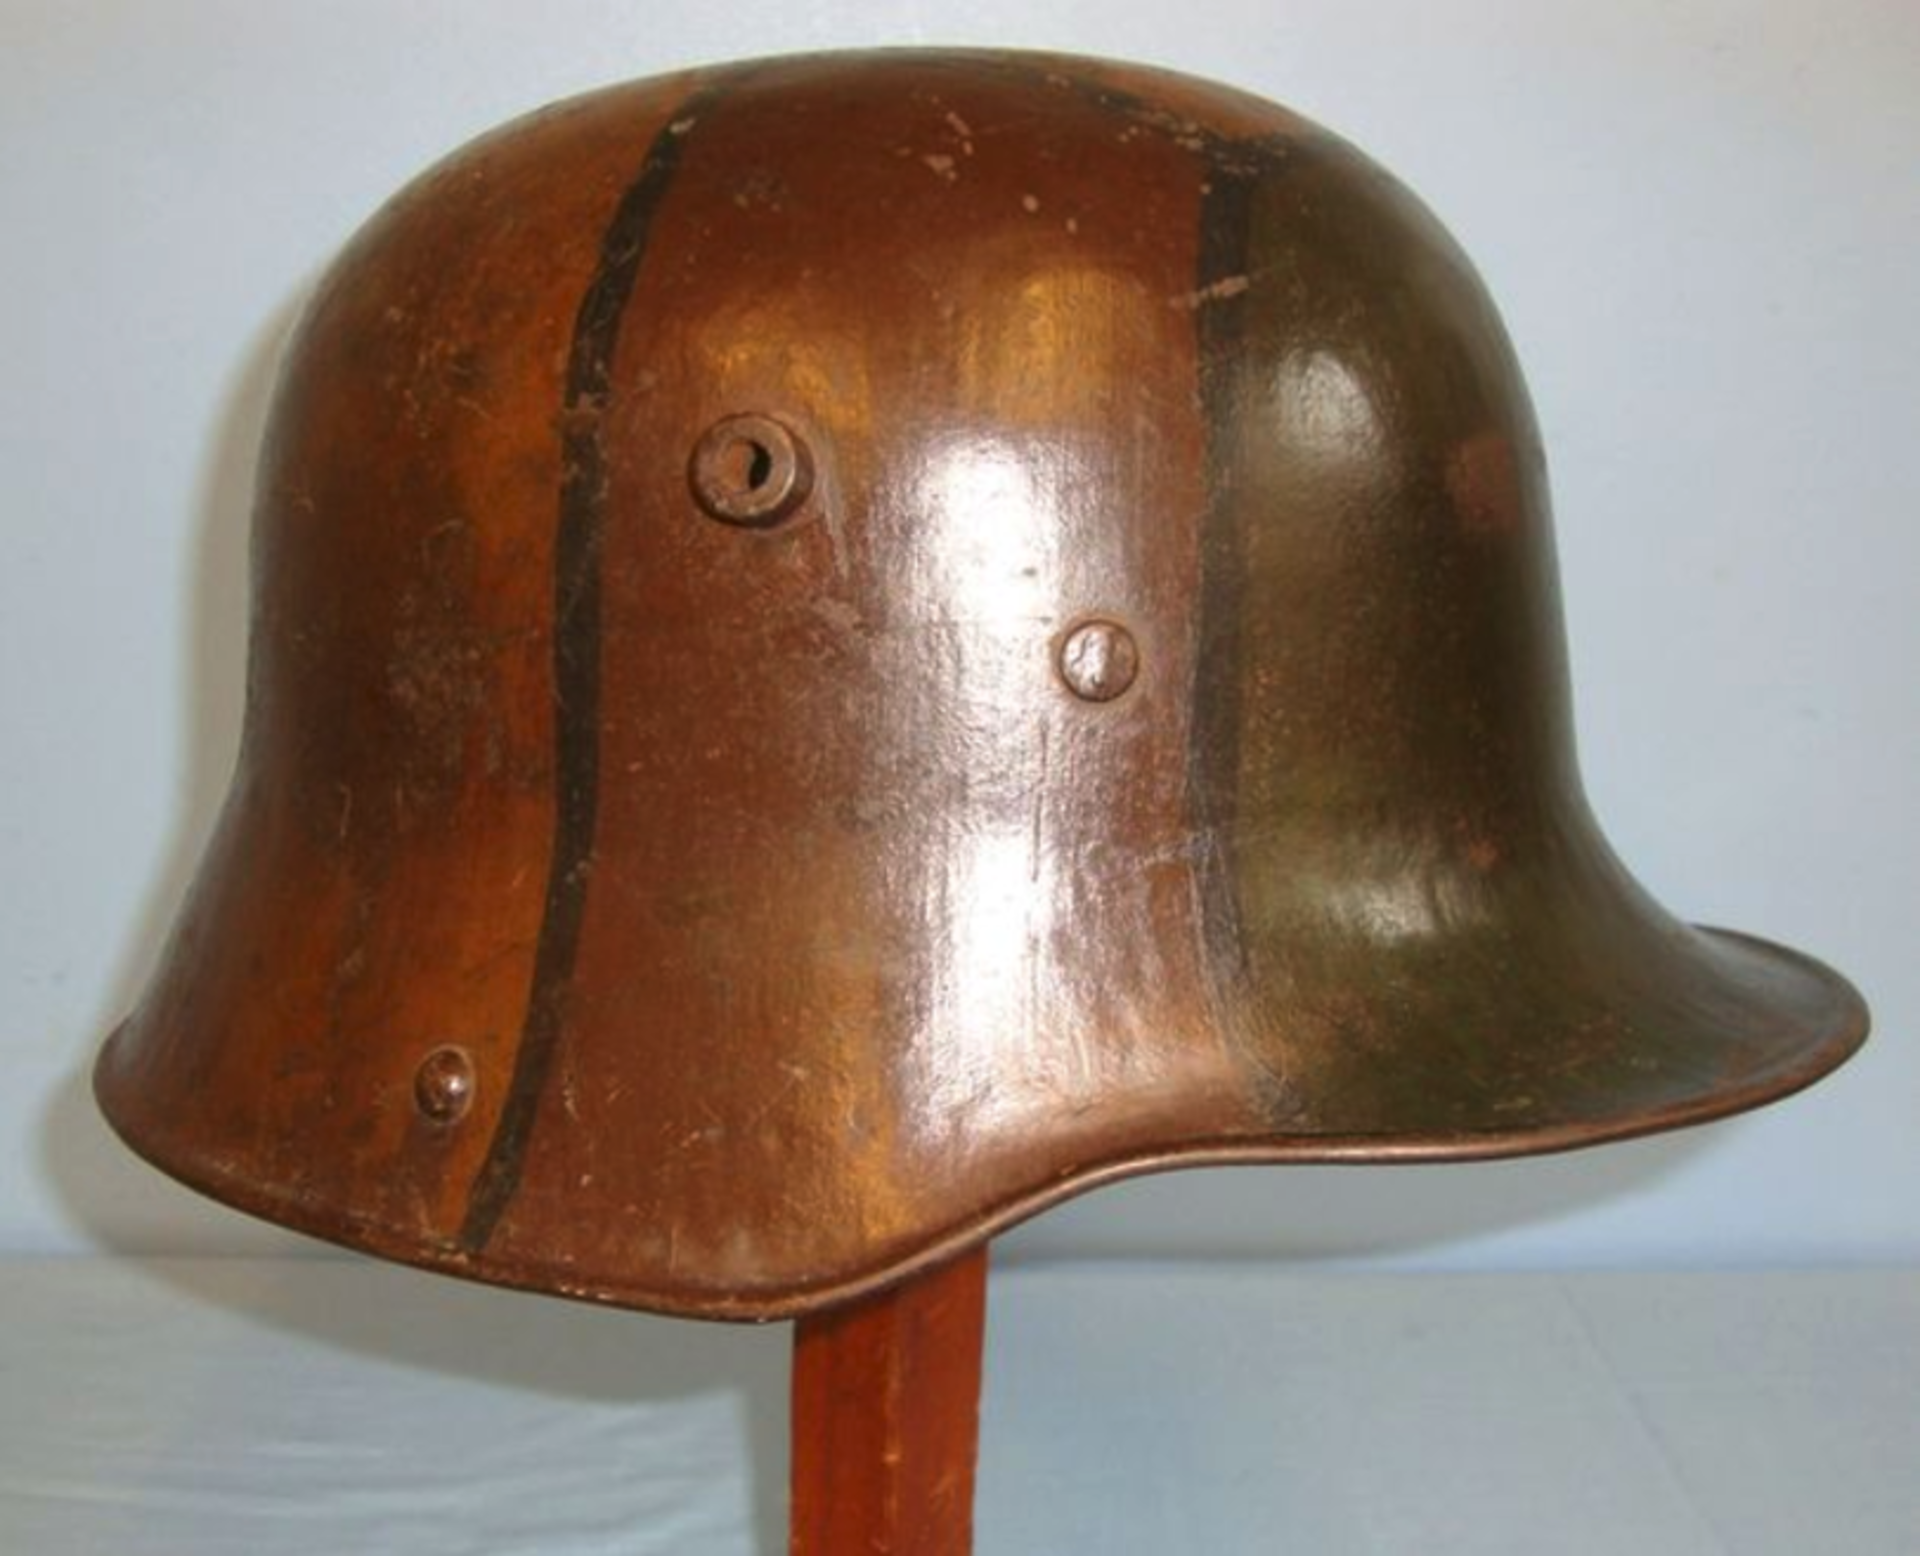 Rare, WW1 German M16 Combat Helmet With Original Sectional Camouflage Paint & Padded Liner.